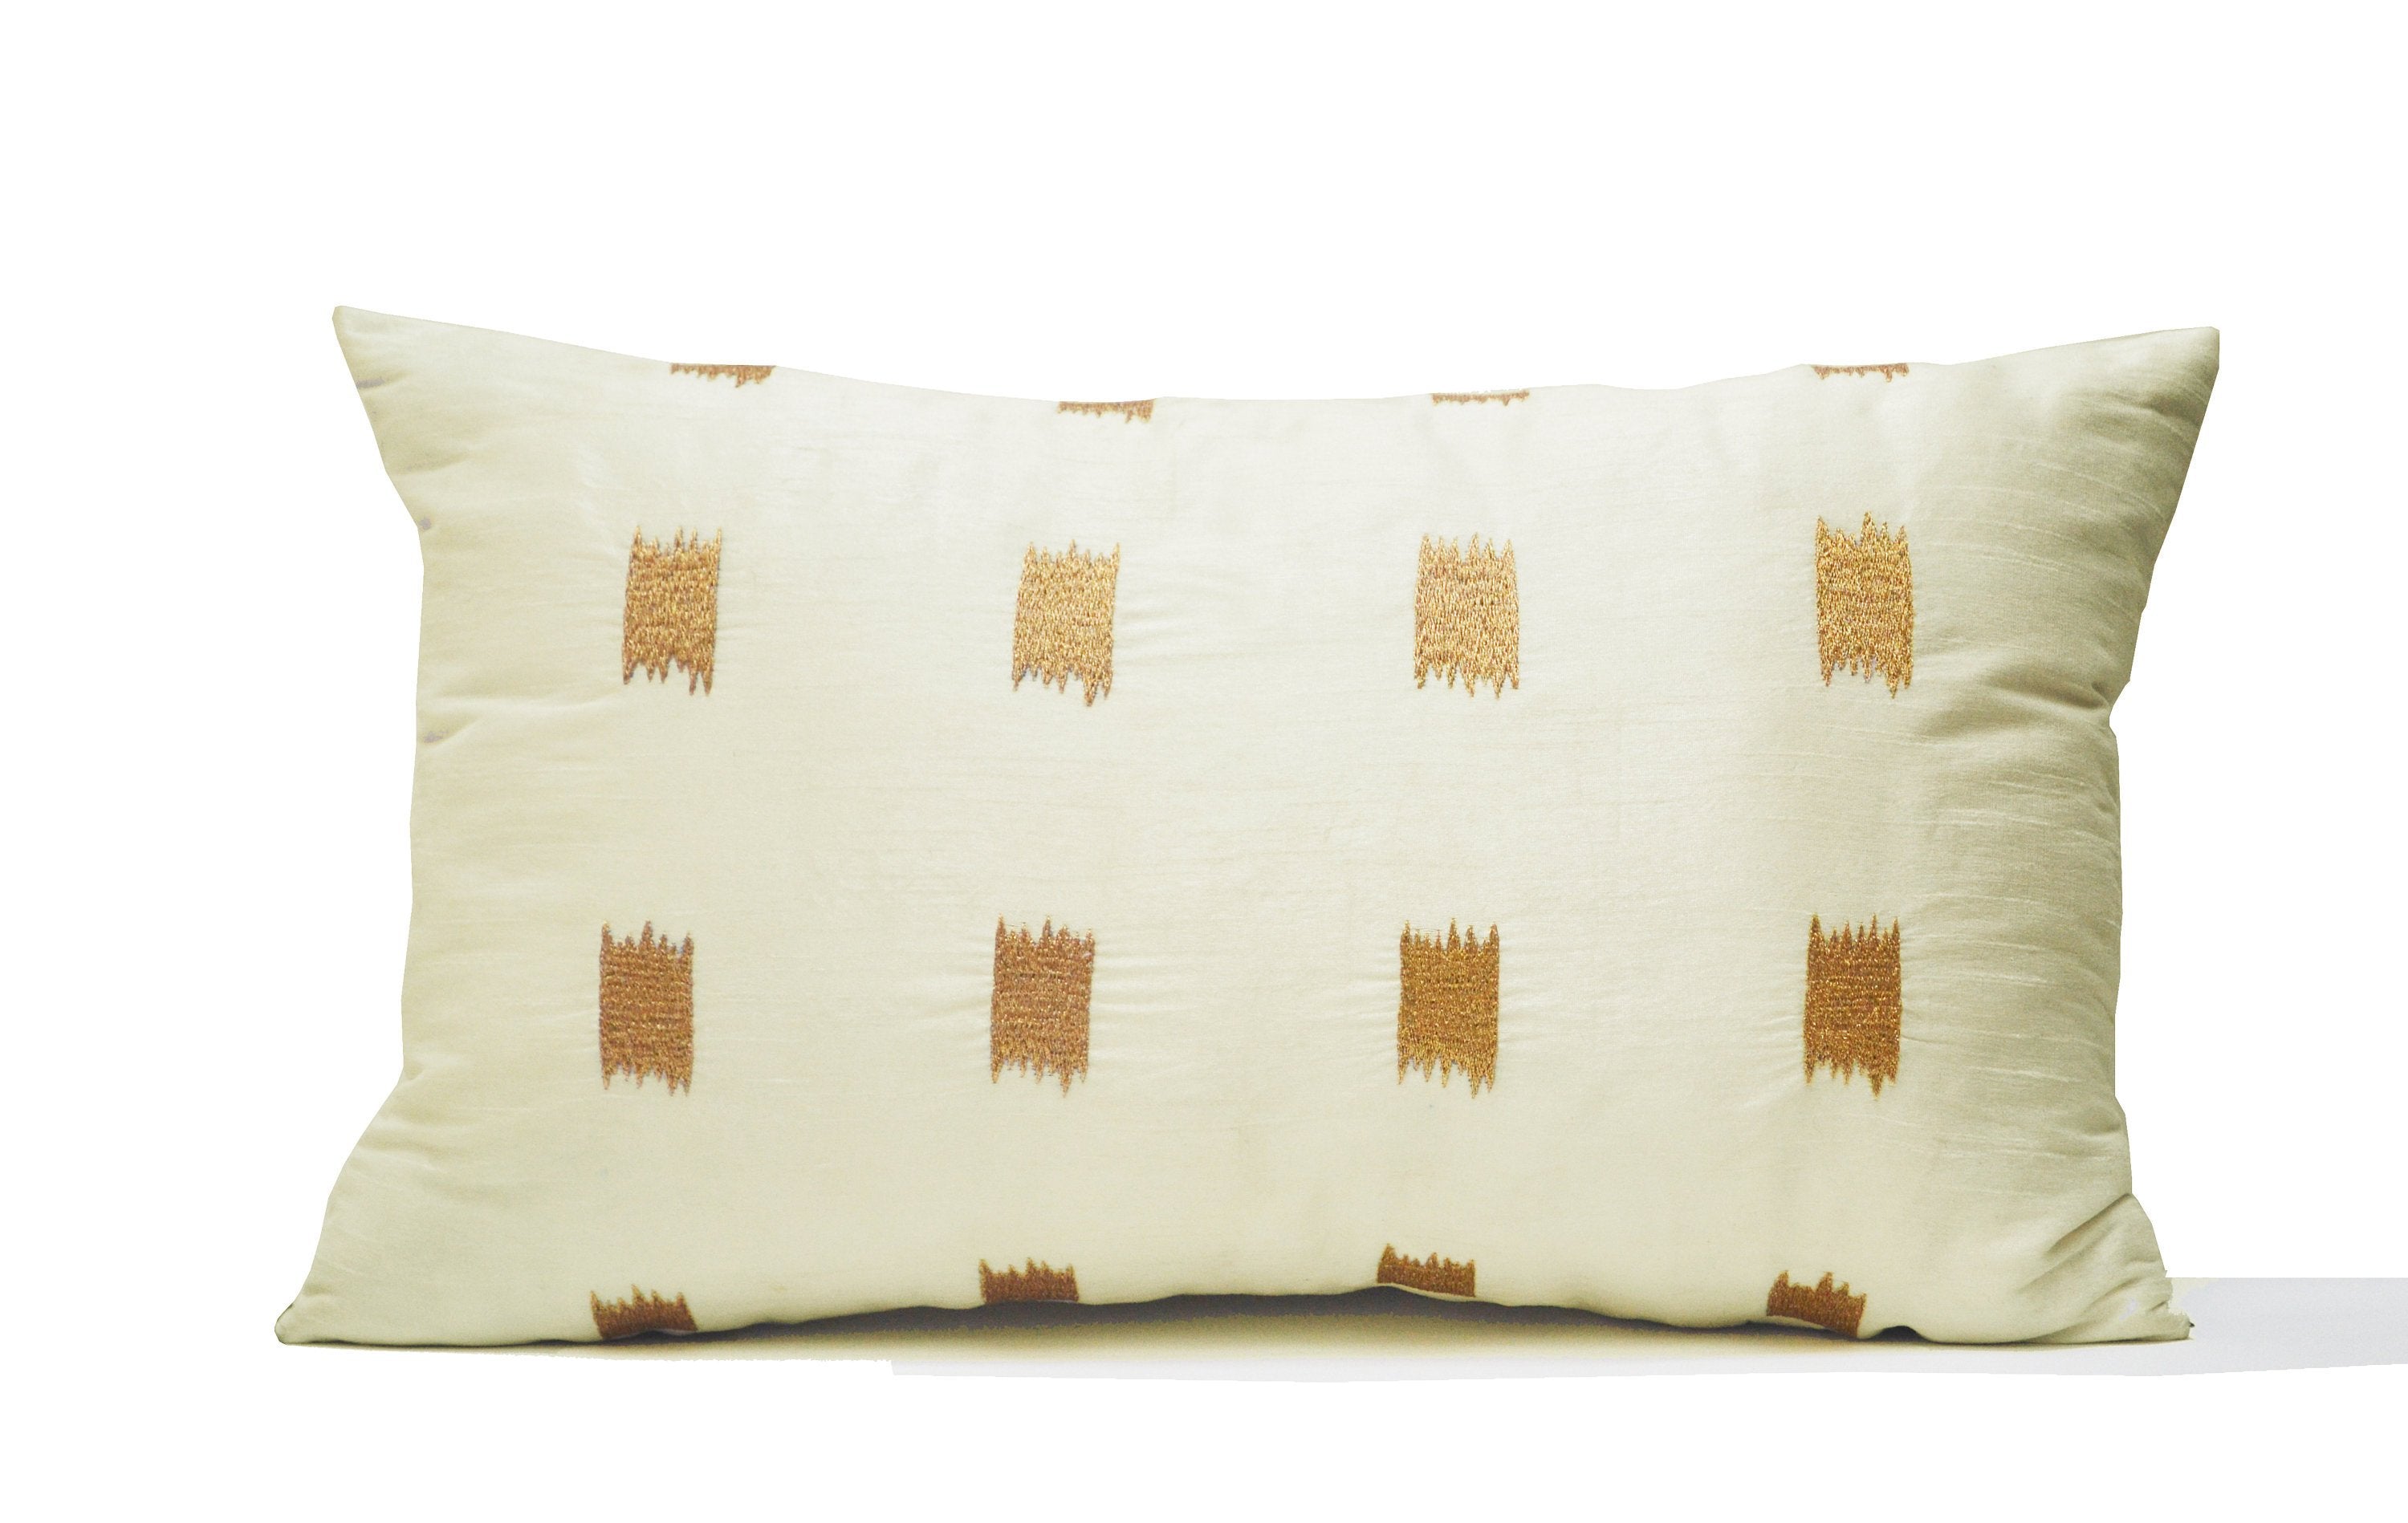 Amore Beaute Ivory Silk Pillow Cover, Ikat Pillow, Lumbar Pillow, Embroidery Embroidered,